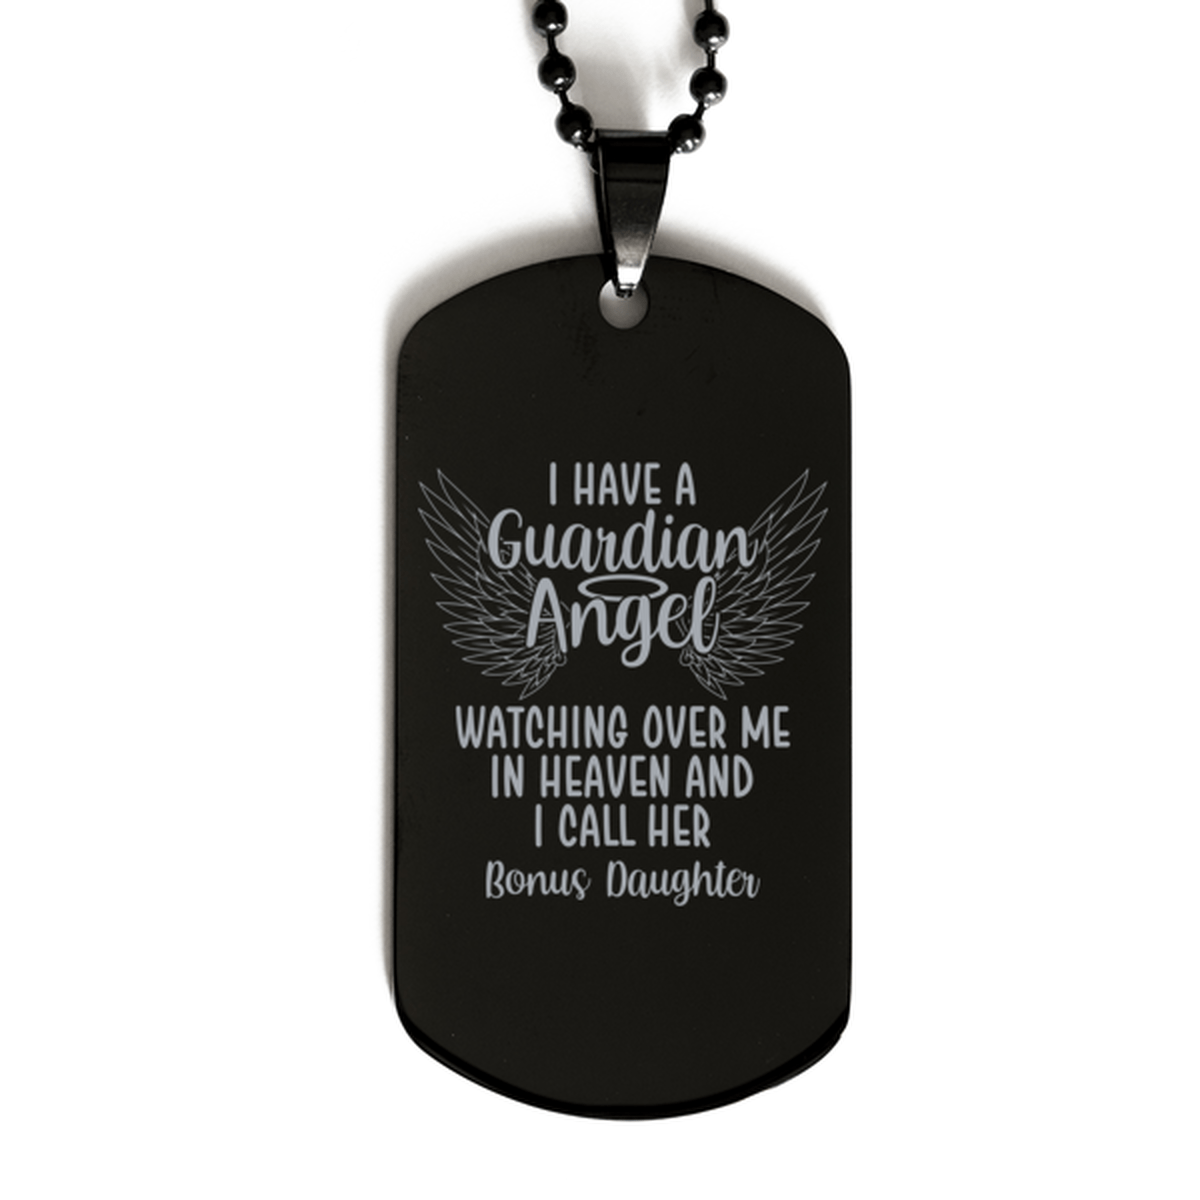 Memorial Bonus Daughter Black Dog Tag, I Have a Guardian Angel I Call Her Bonus Daughter, Best Remembrance Gifts for Family Friends